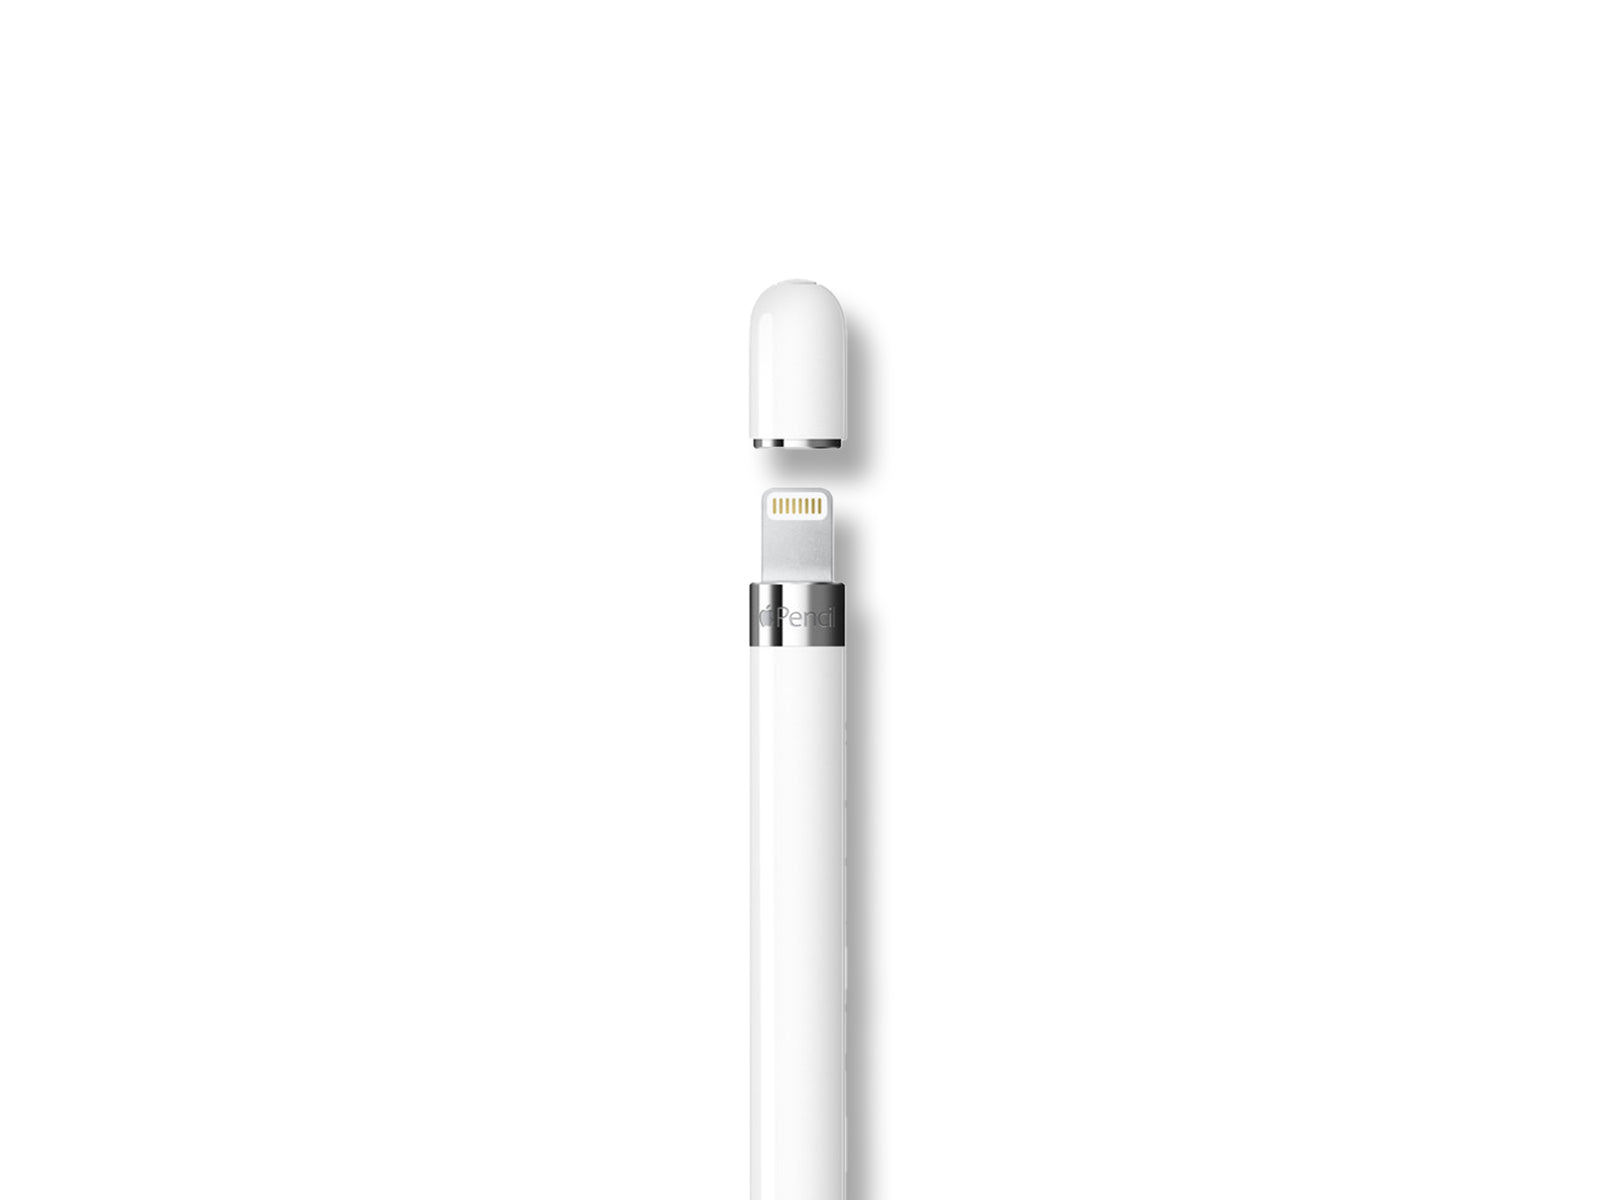 Apple Pencil 1st Generation Showing Lightning Cable Port